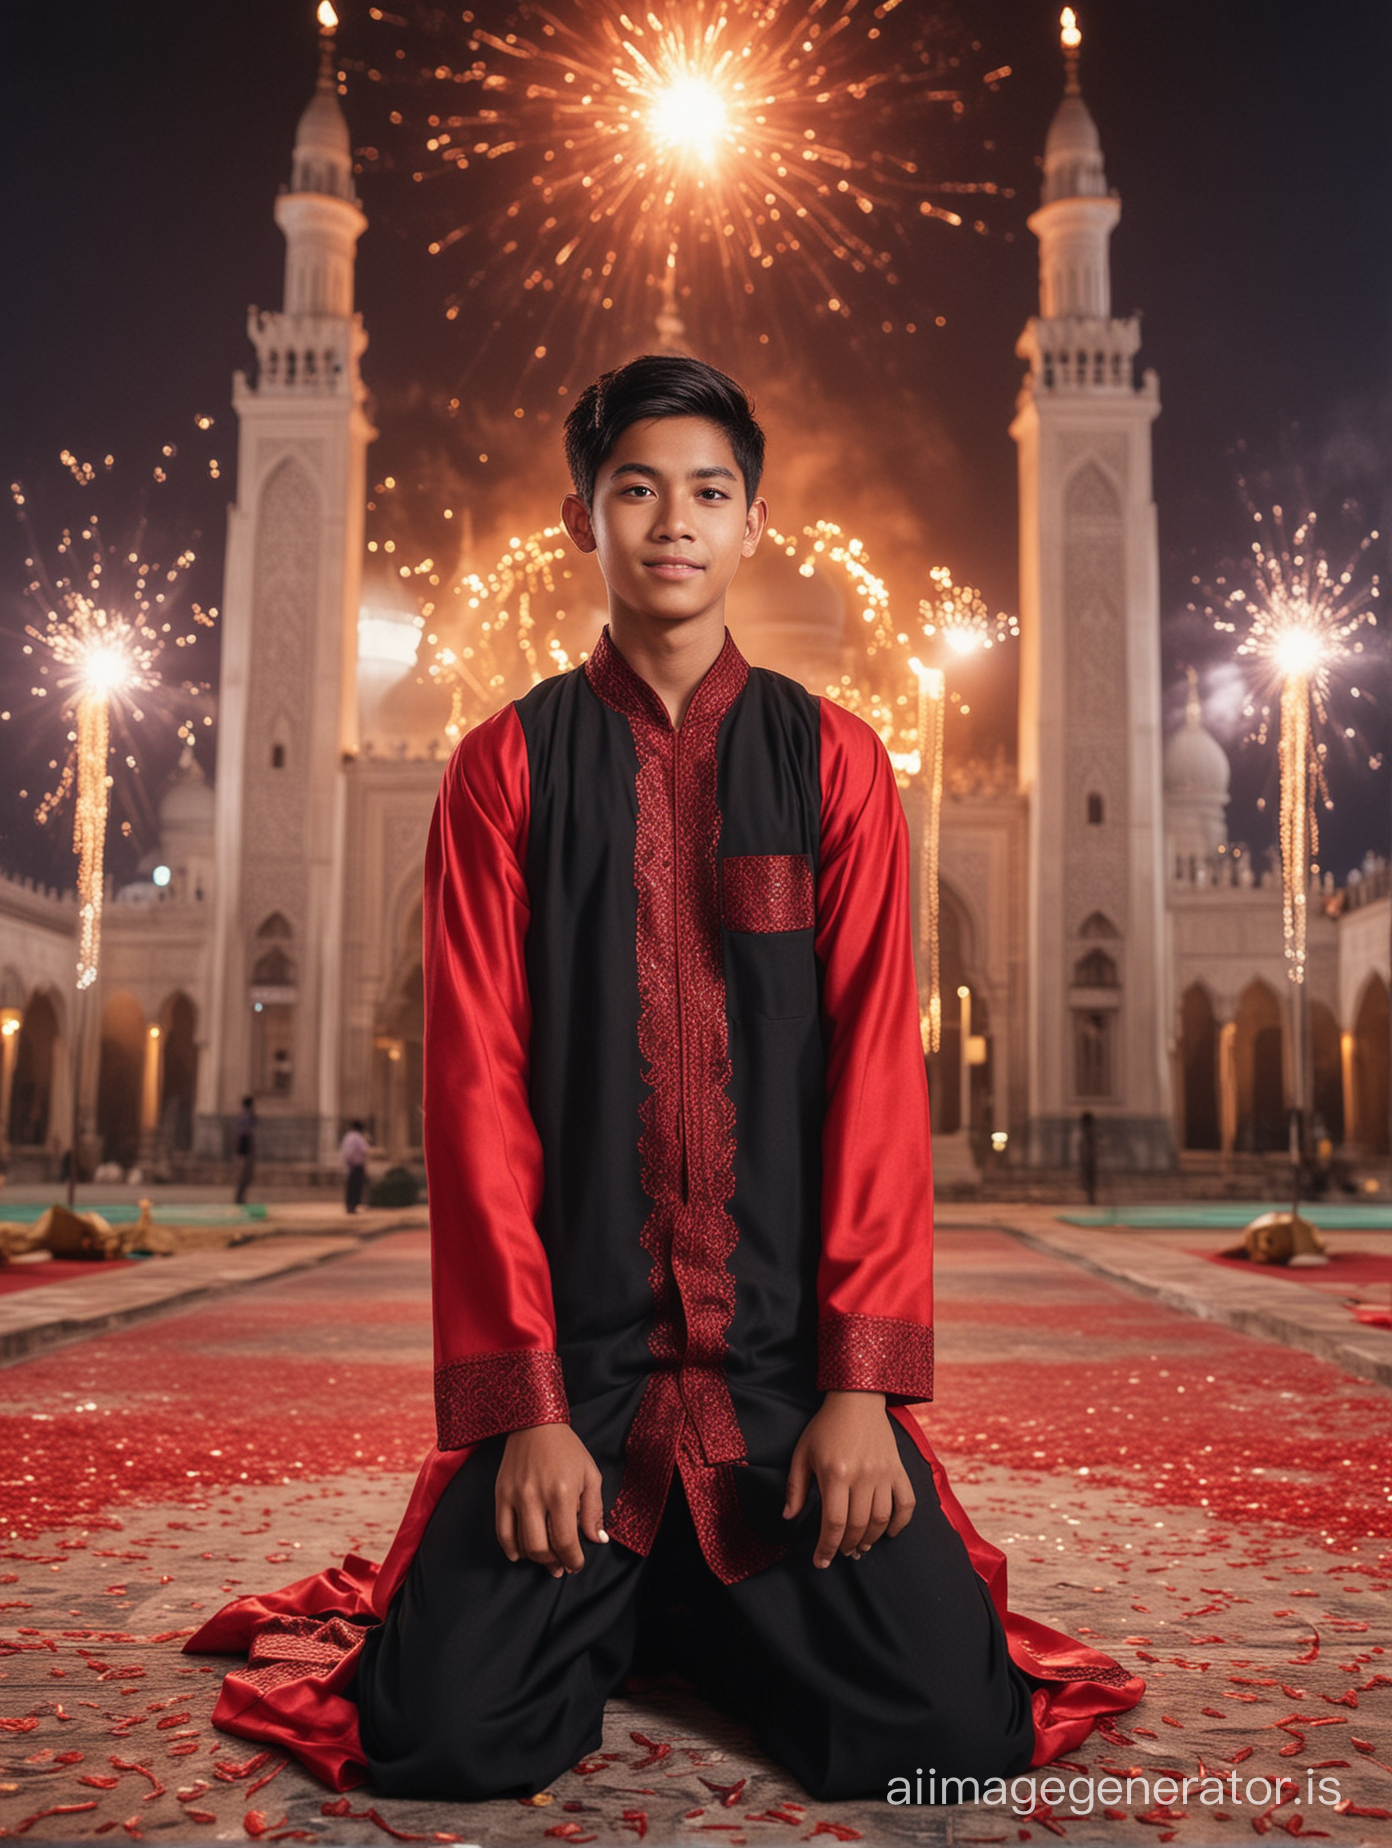 A young handsome indonesian boy age 17 years old, black short neat hair wearing black squat and red jubah or robes. Is posing for eid. Background is beautiful mosque with glittering light and fire crackers